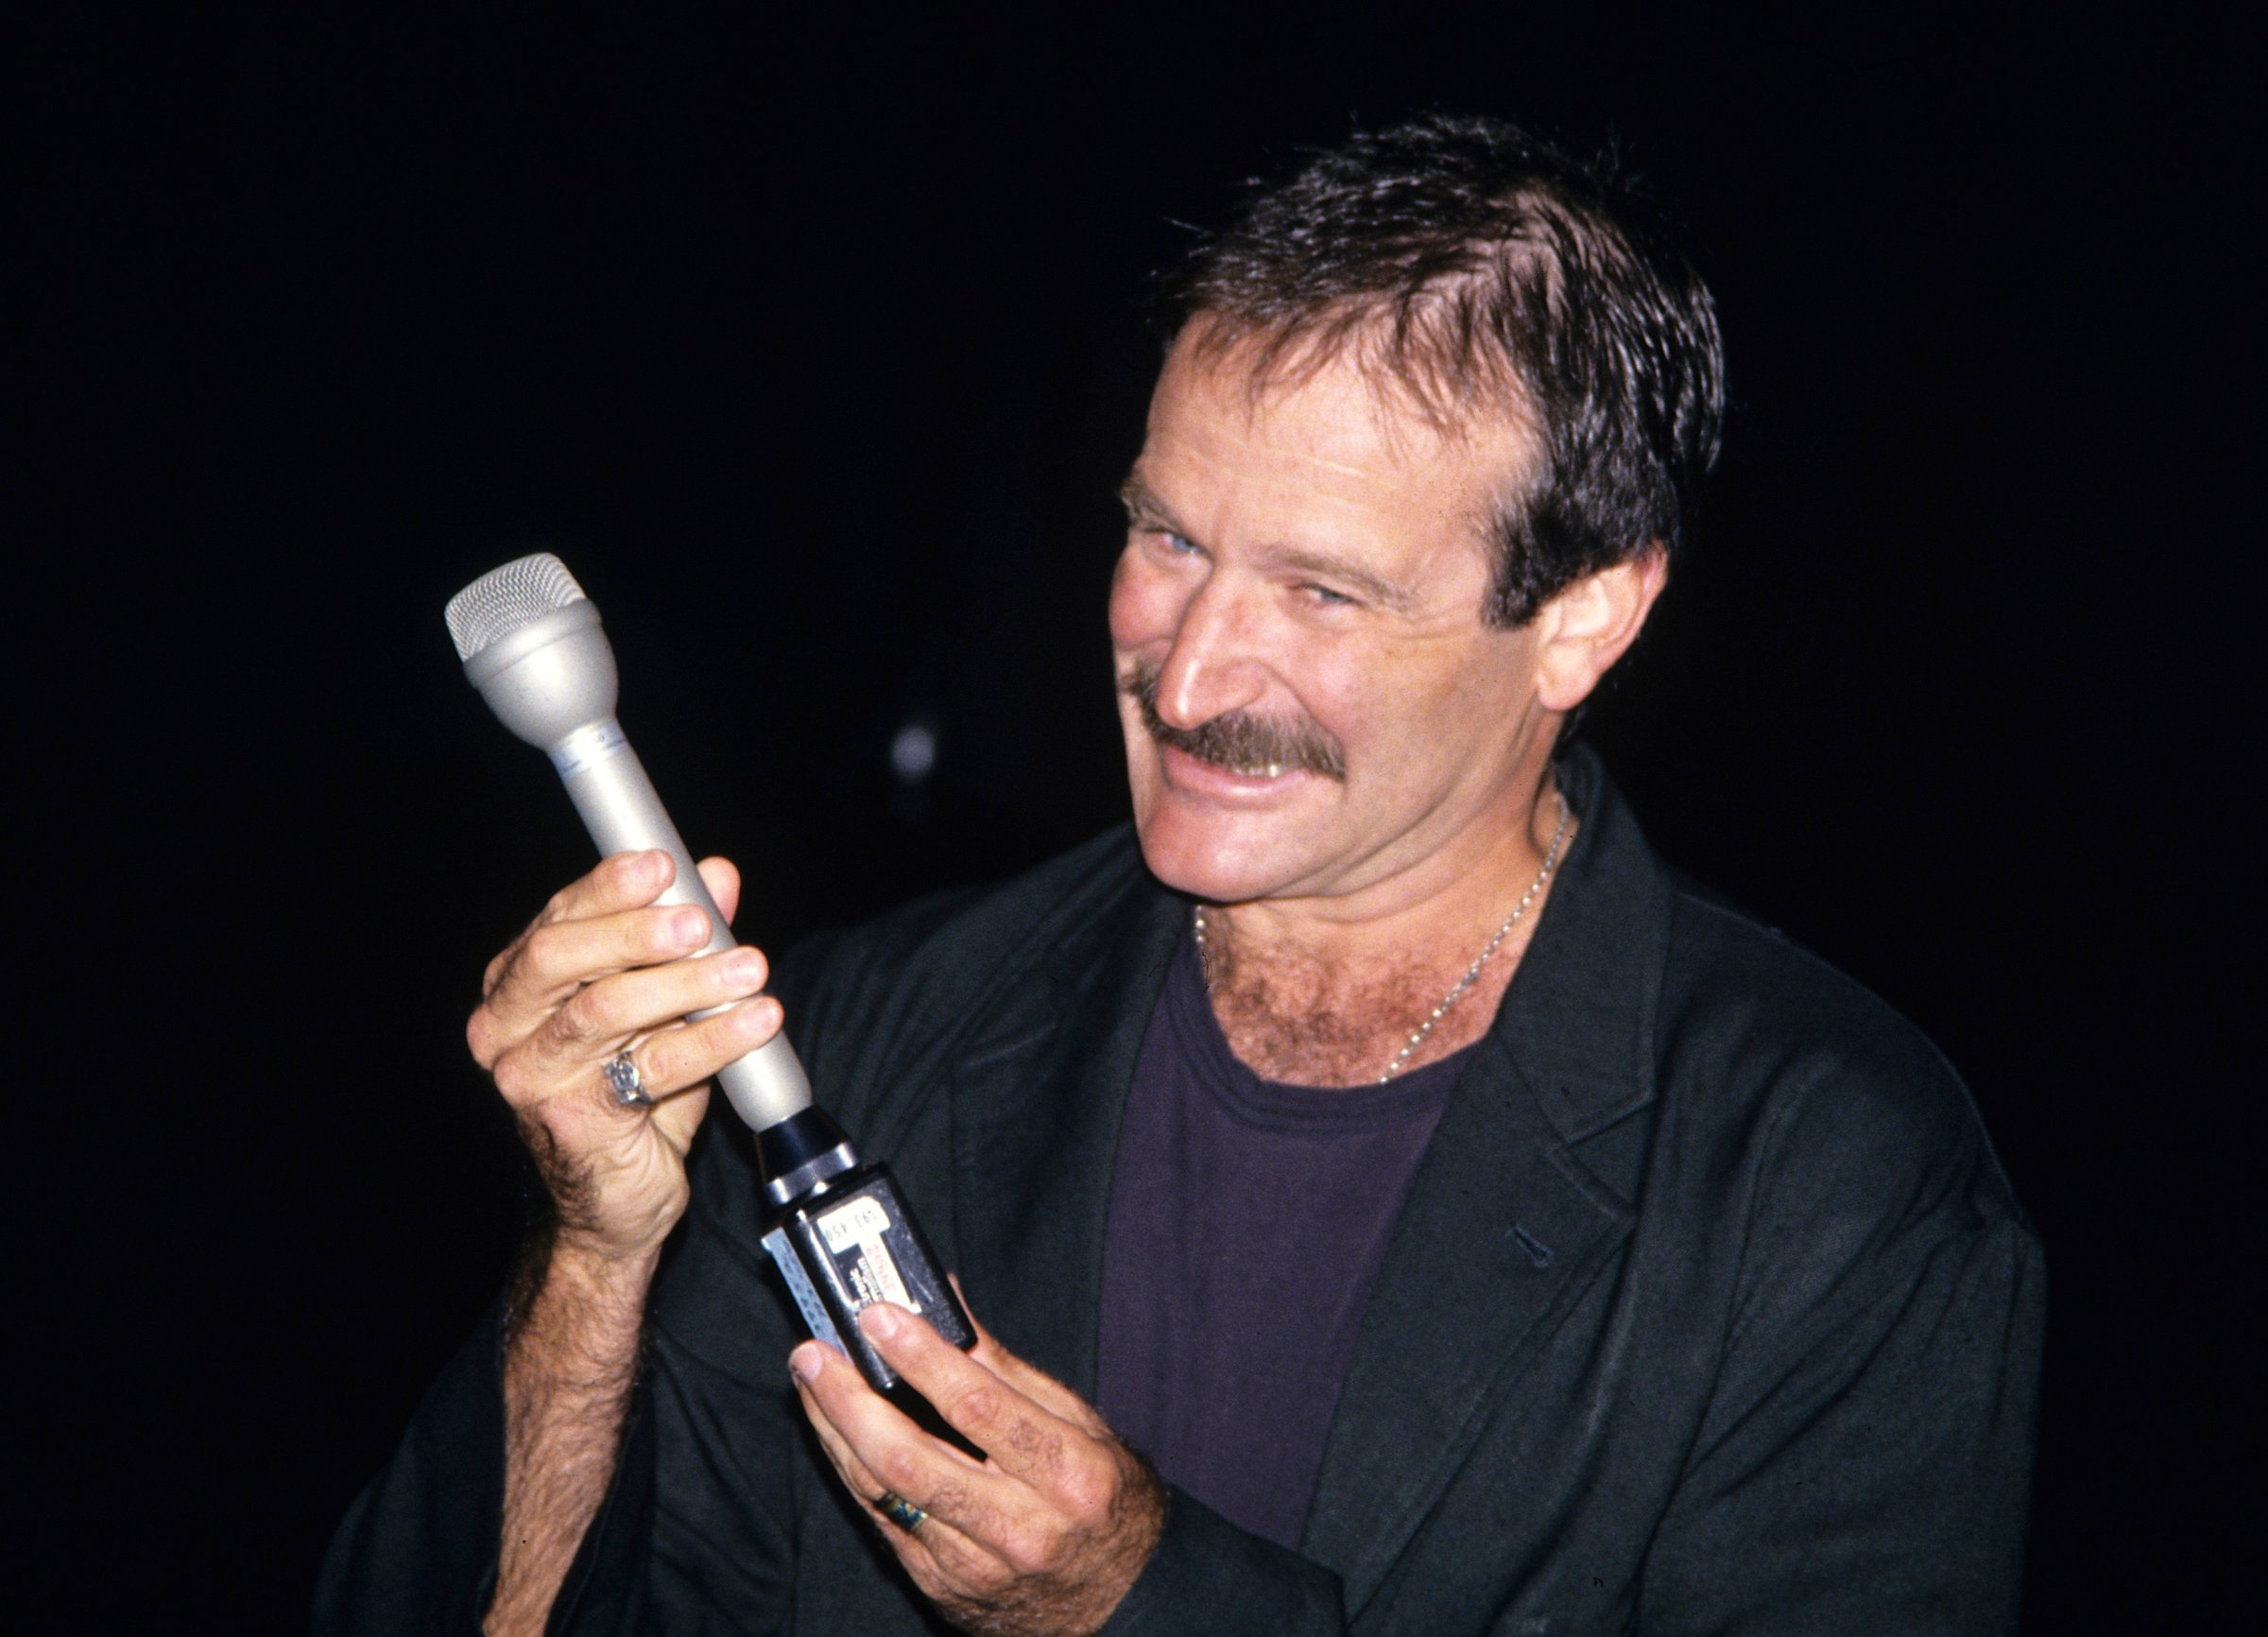 Robin Williams at the Friars Roast for Whoopi Goldberg at the Hilton Hotel in New York City on October 7, 1993.